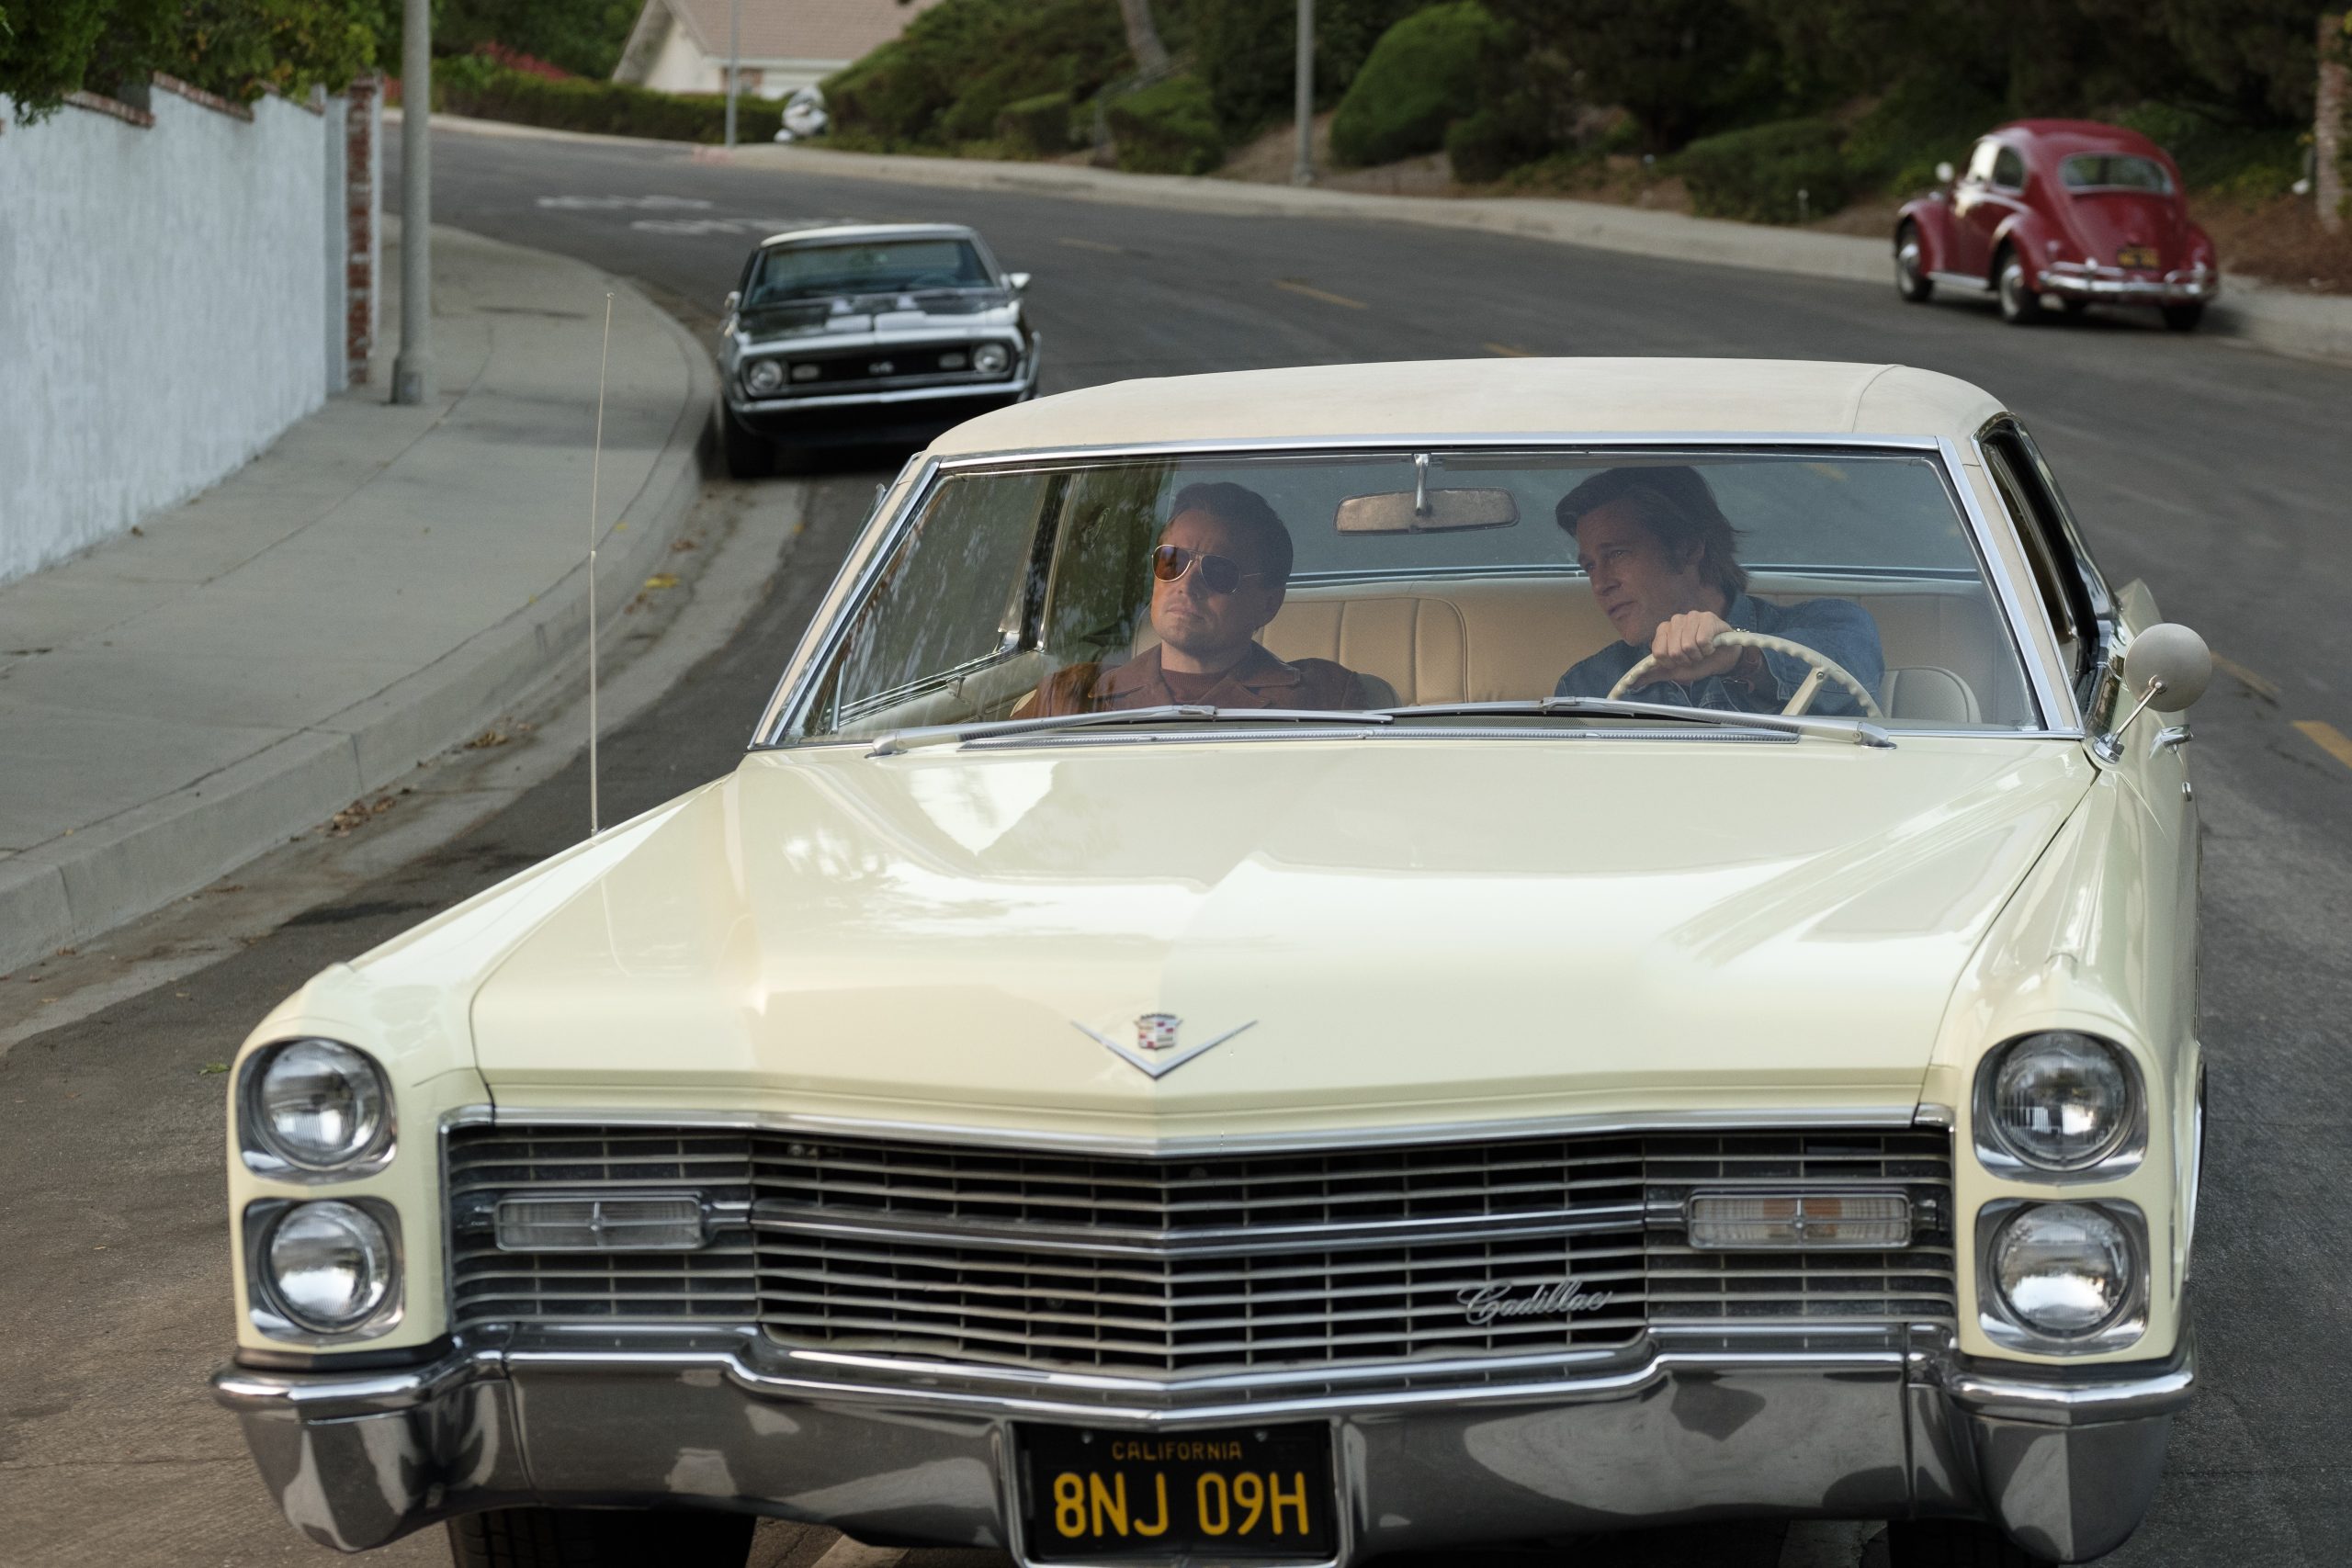 Your chance to own Leonardo Di Caprio and Brand Pitt's cars from Once Upon a Time in Hollywood